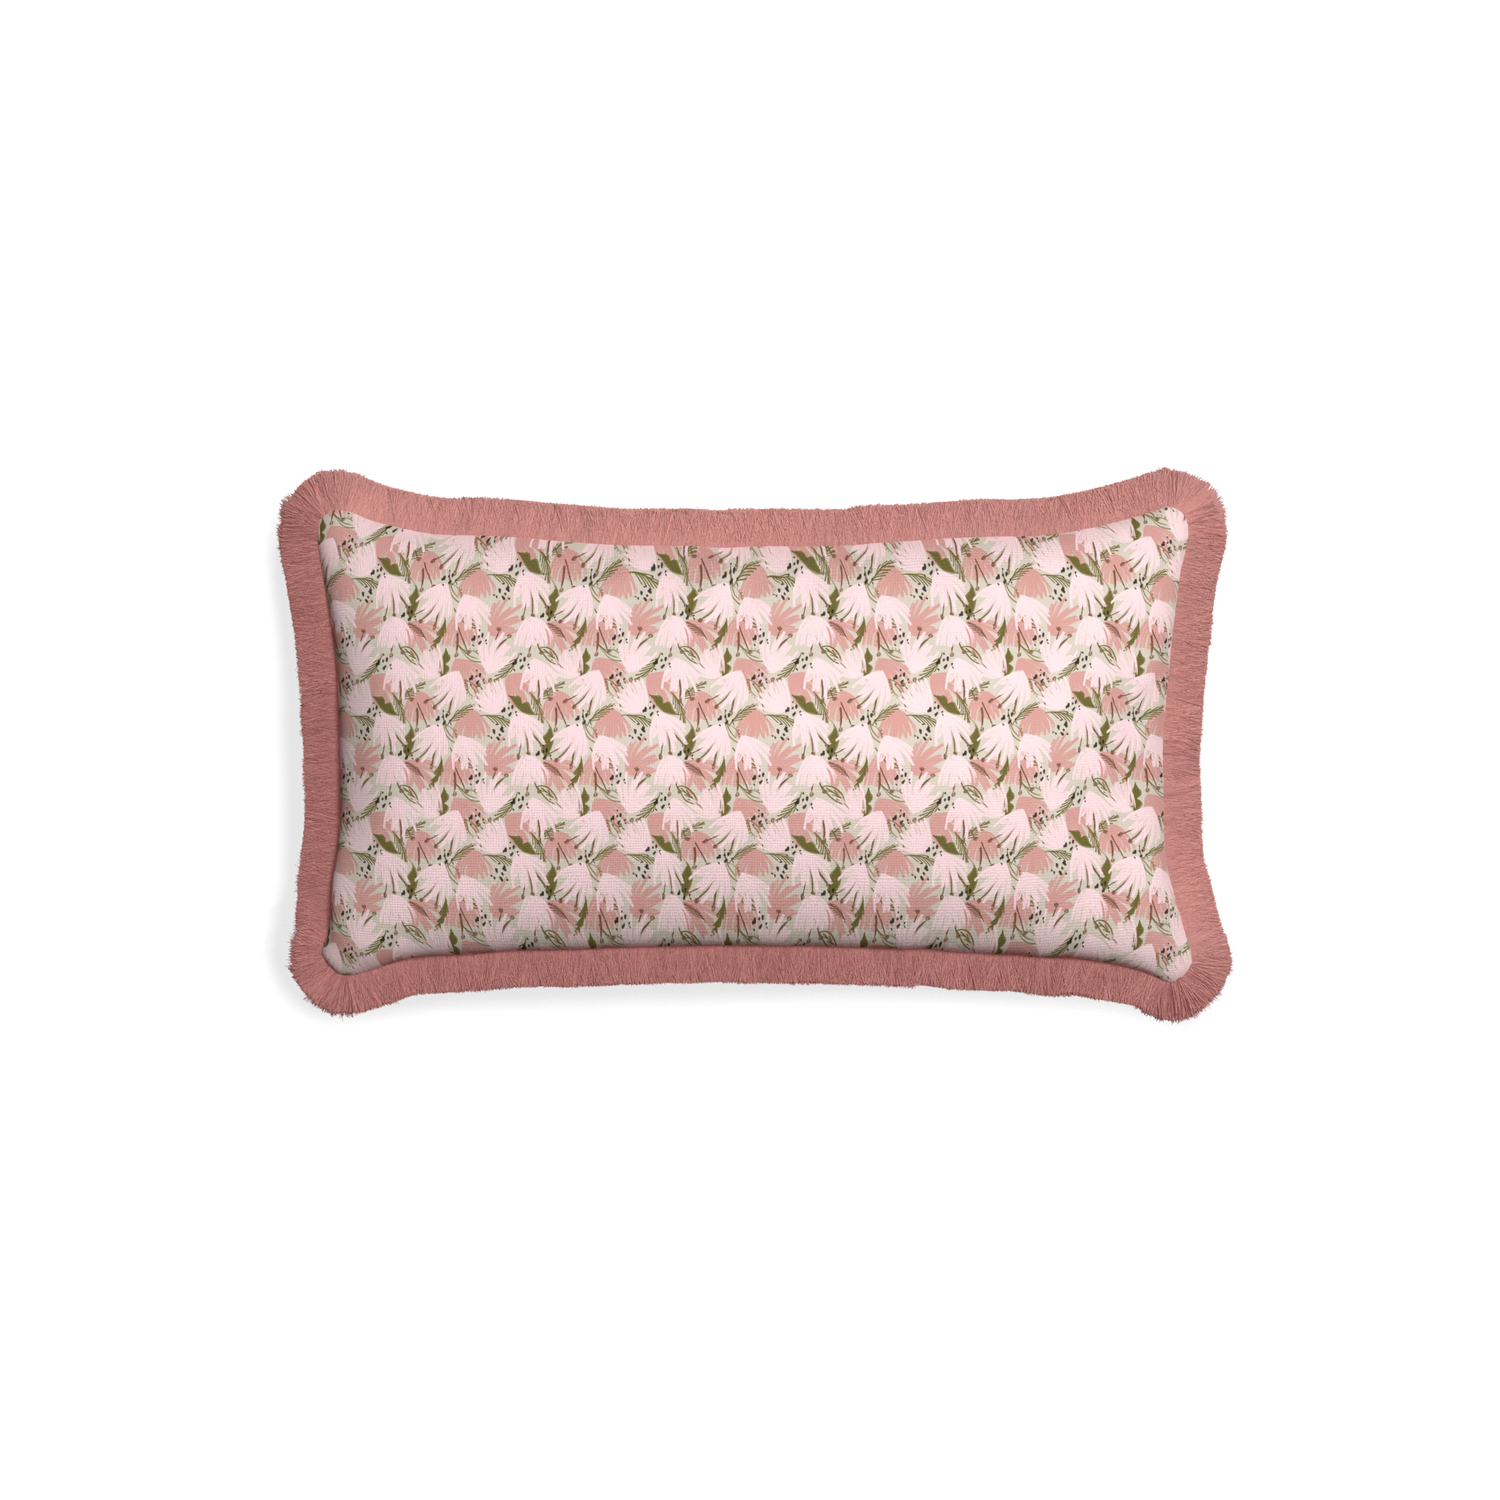 Petite-lumbar eden pink custom pink floralpillow with d fringe on white background